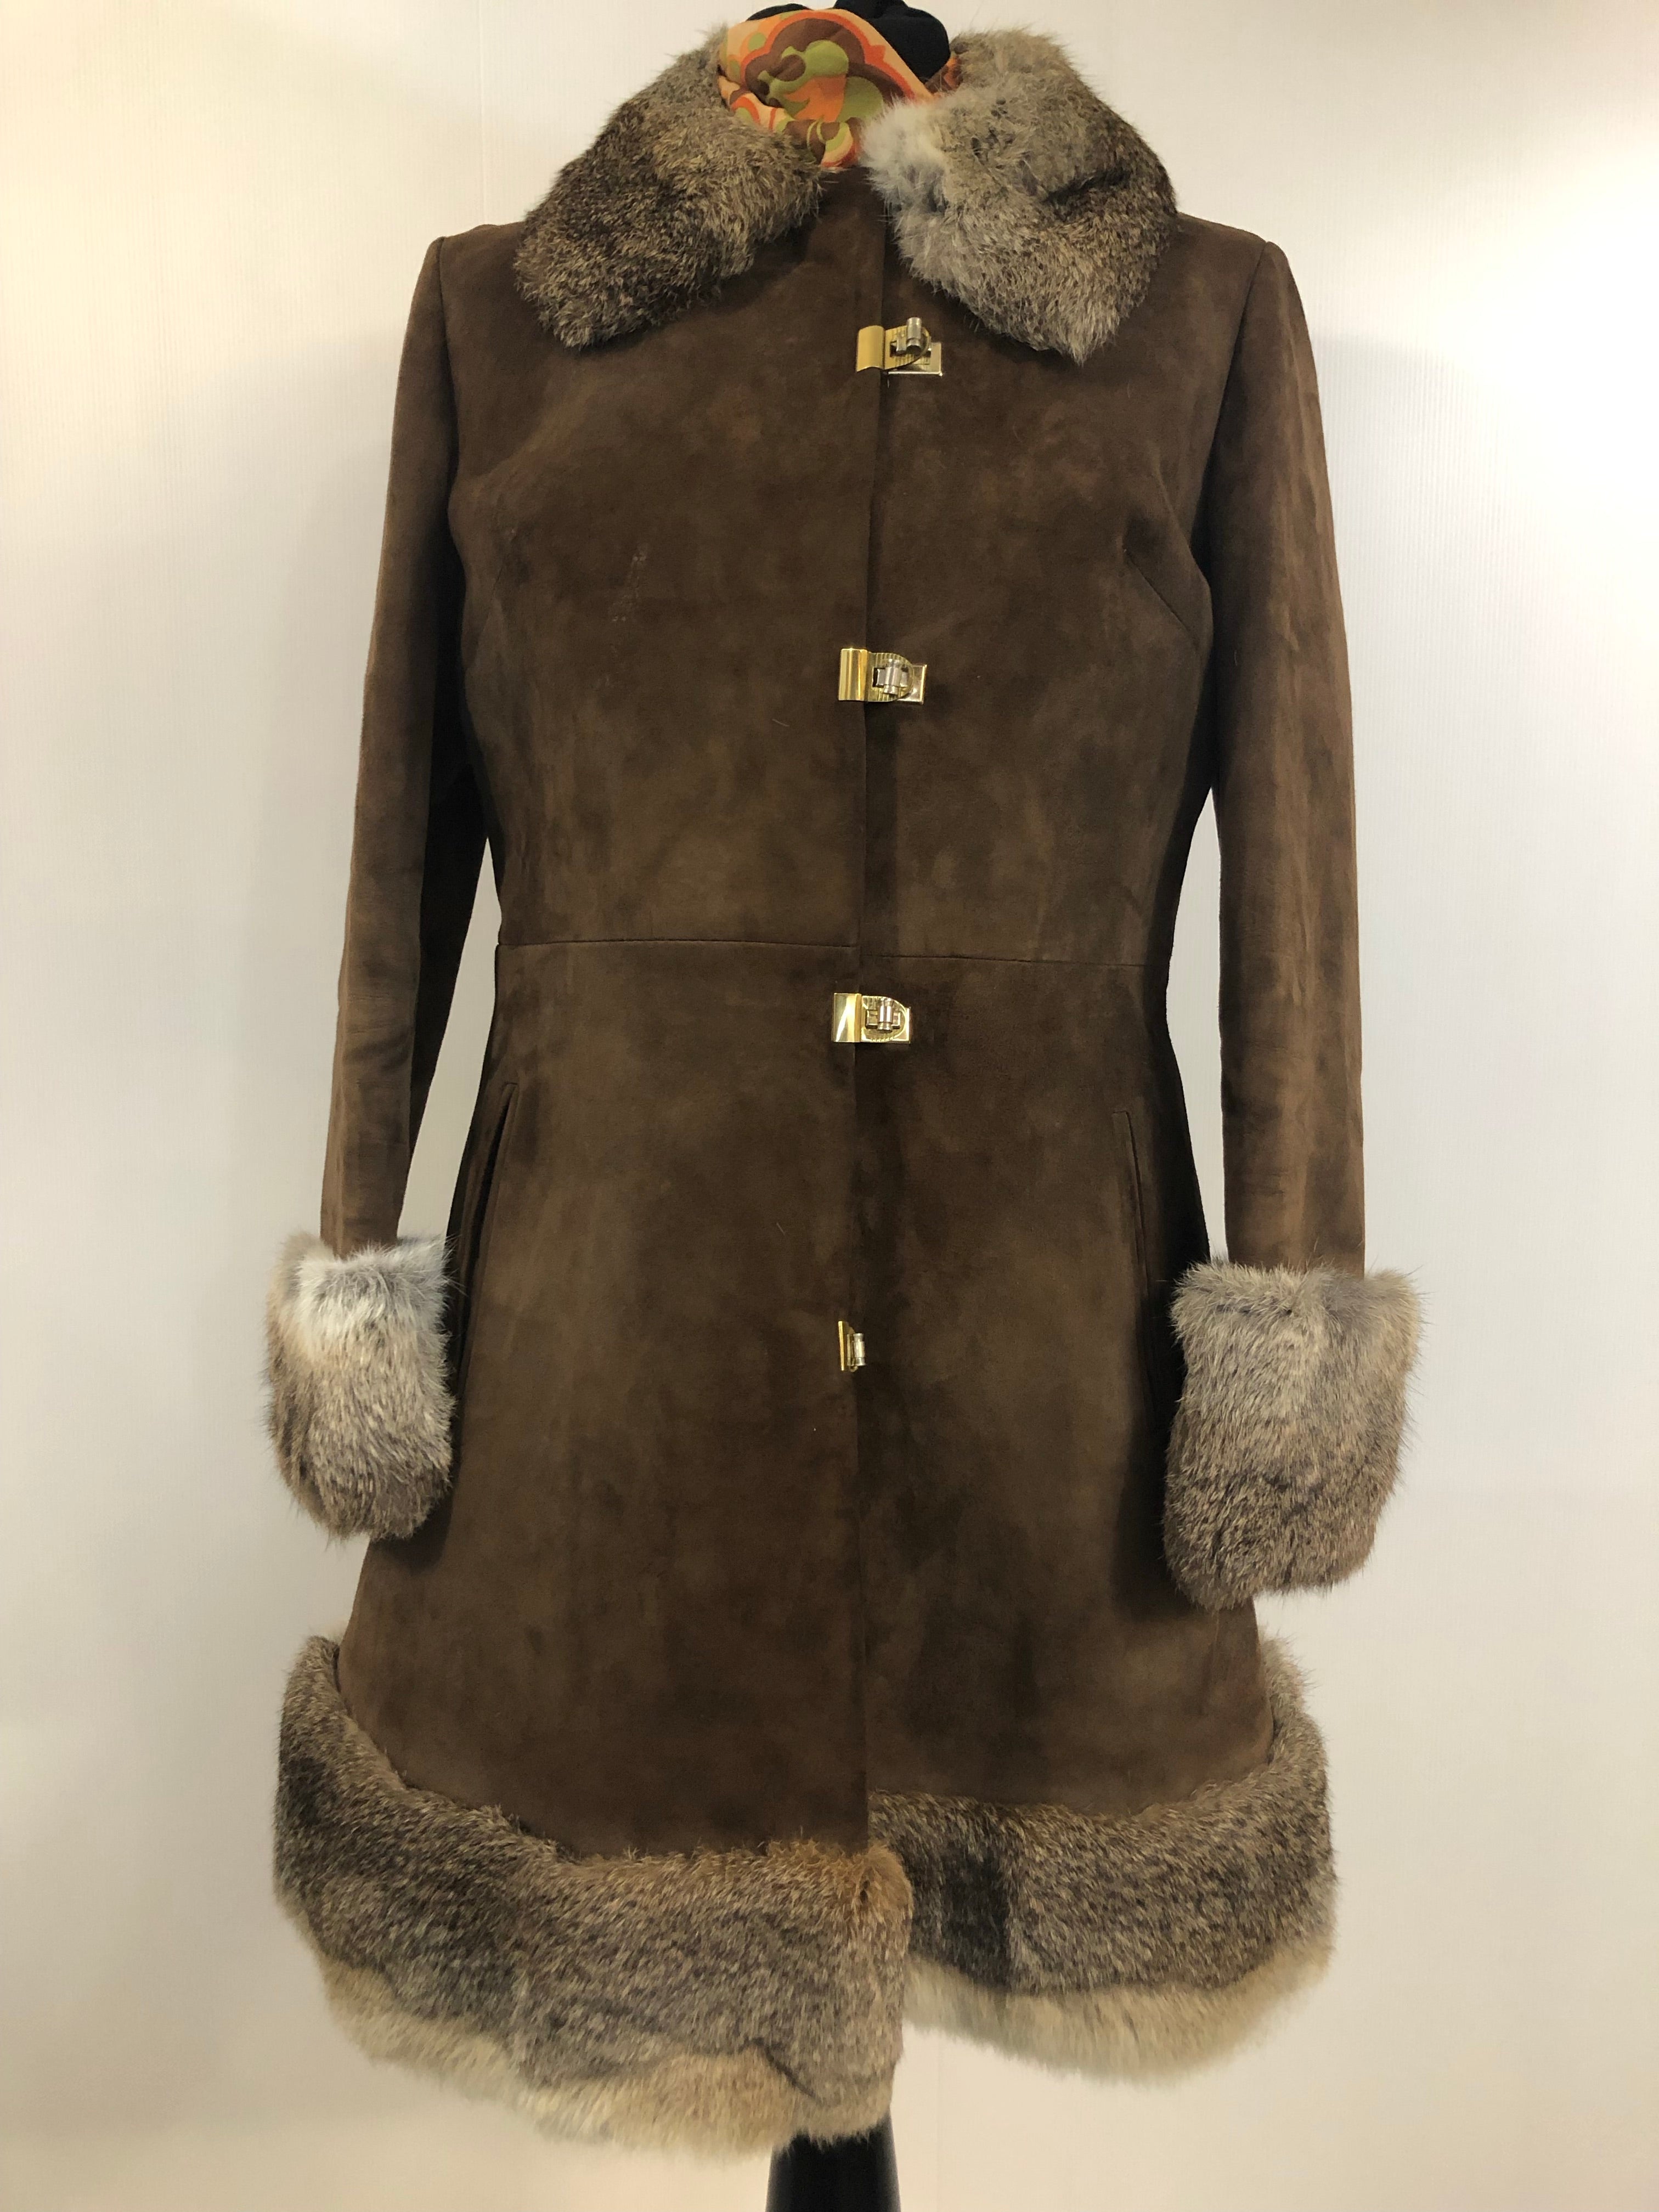 1960s Coney Fur and Suede Coat - Size UK 10